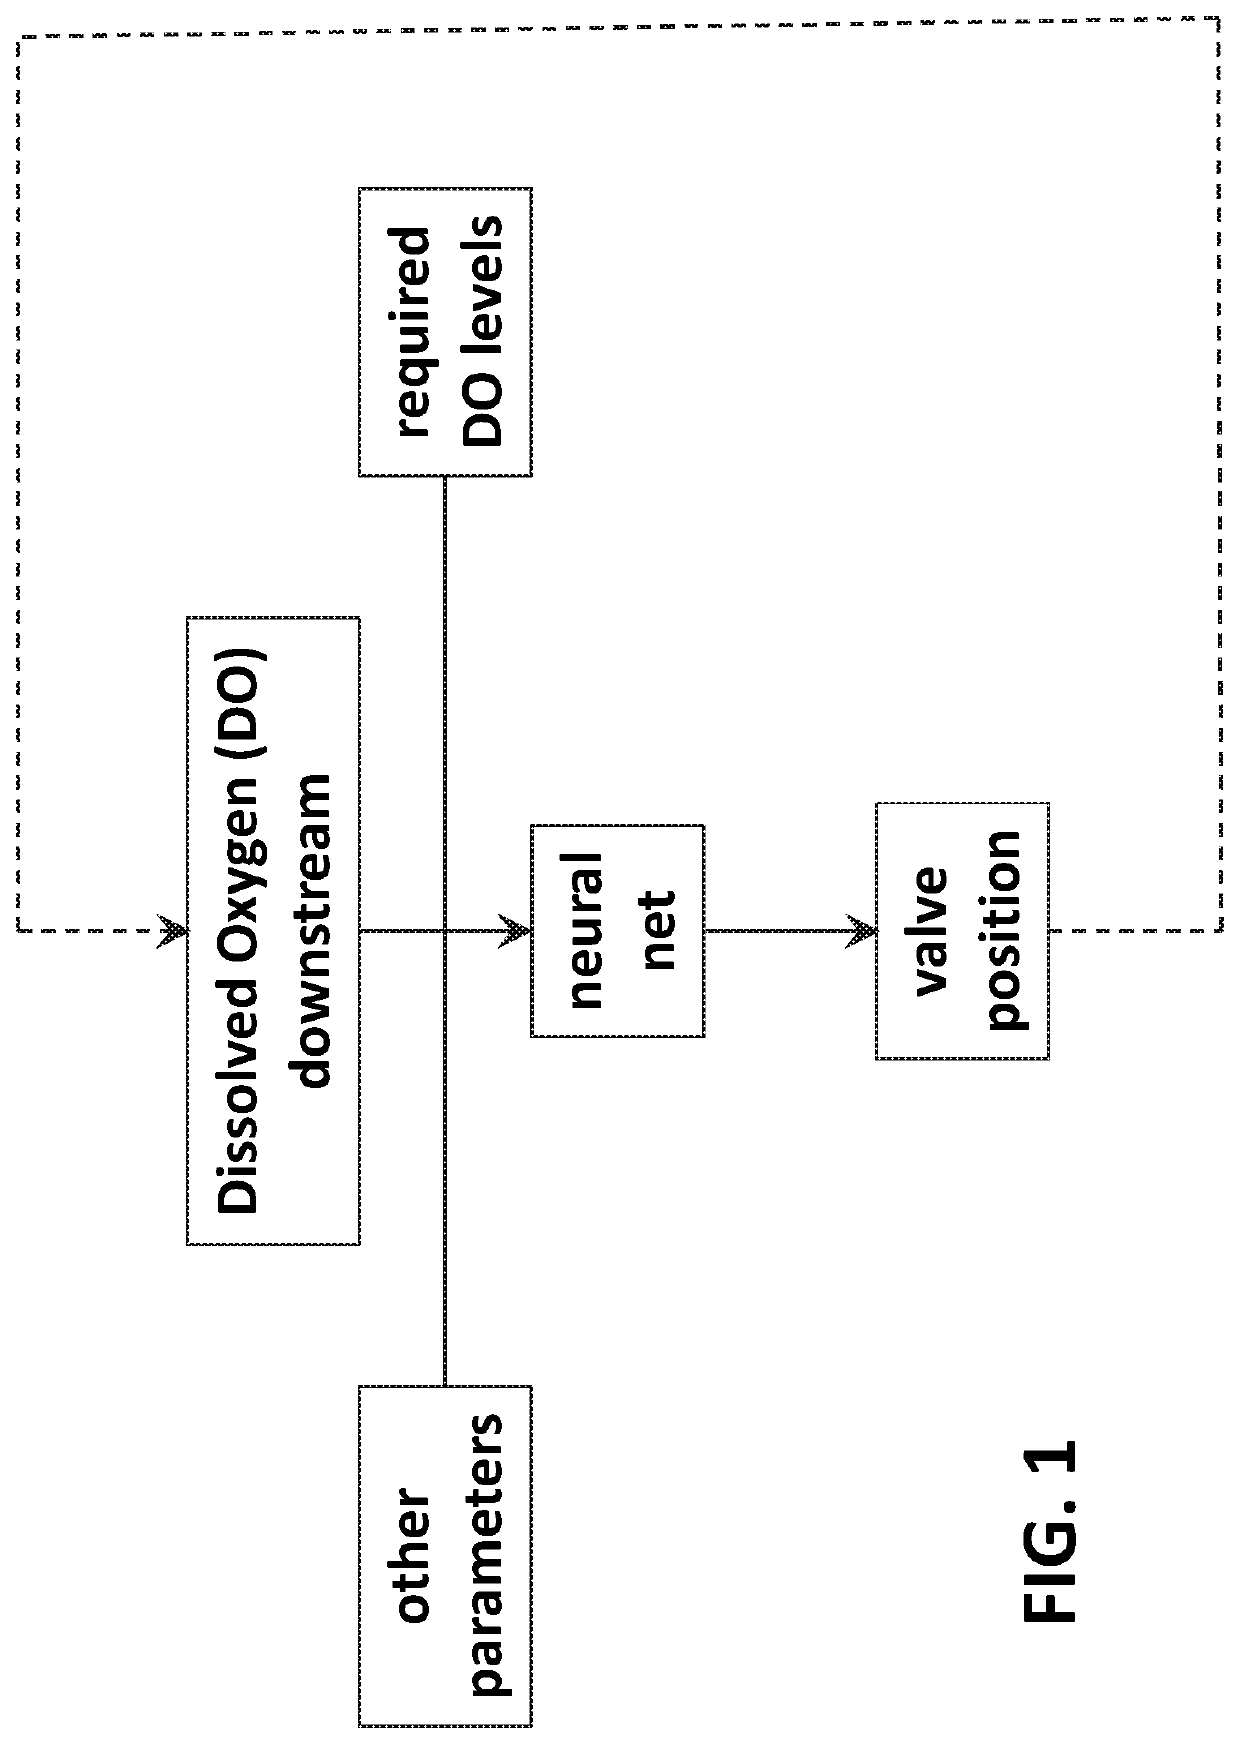 System and method for closed-loop dissolved oxygen monitoring and control